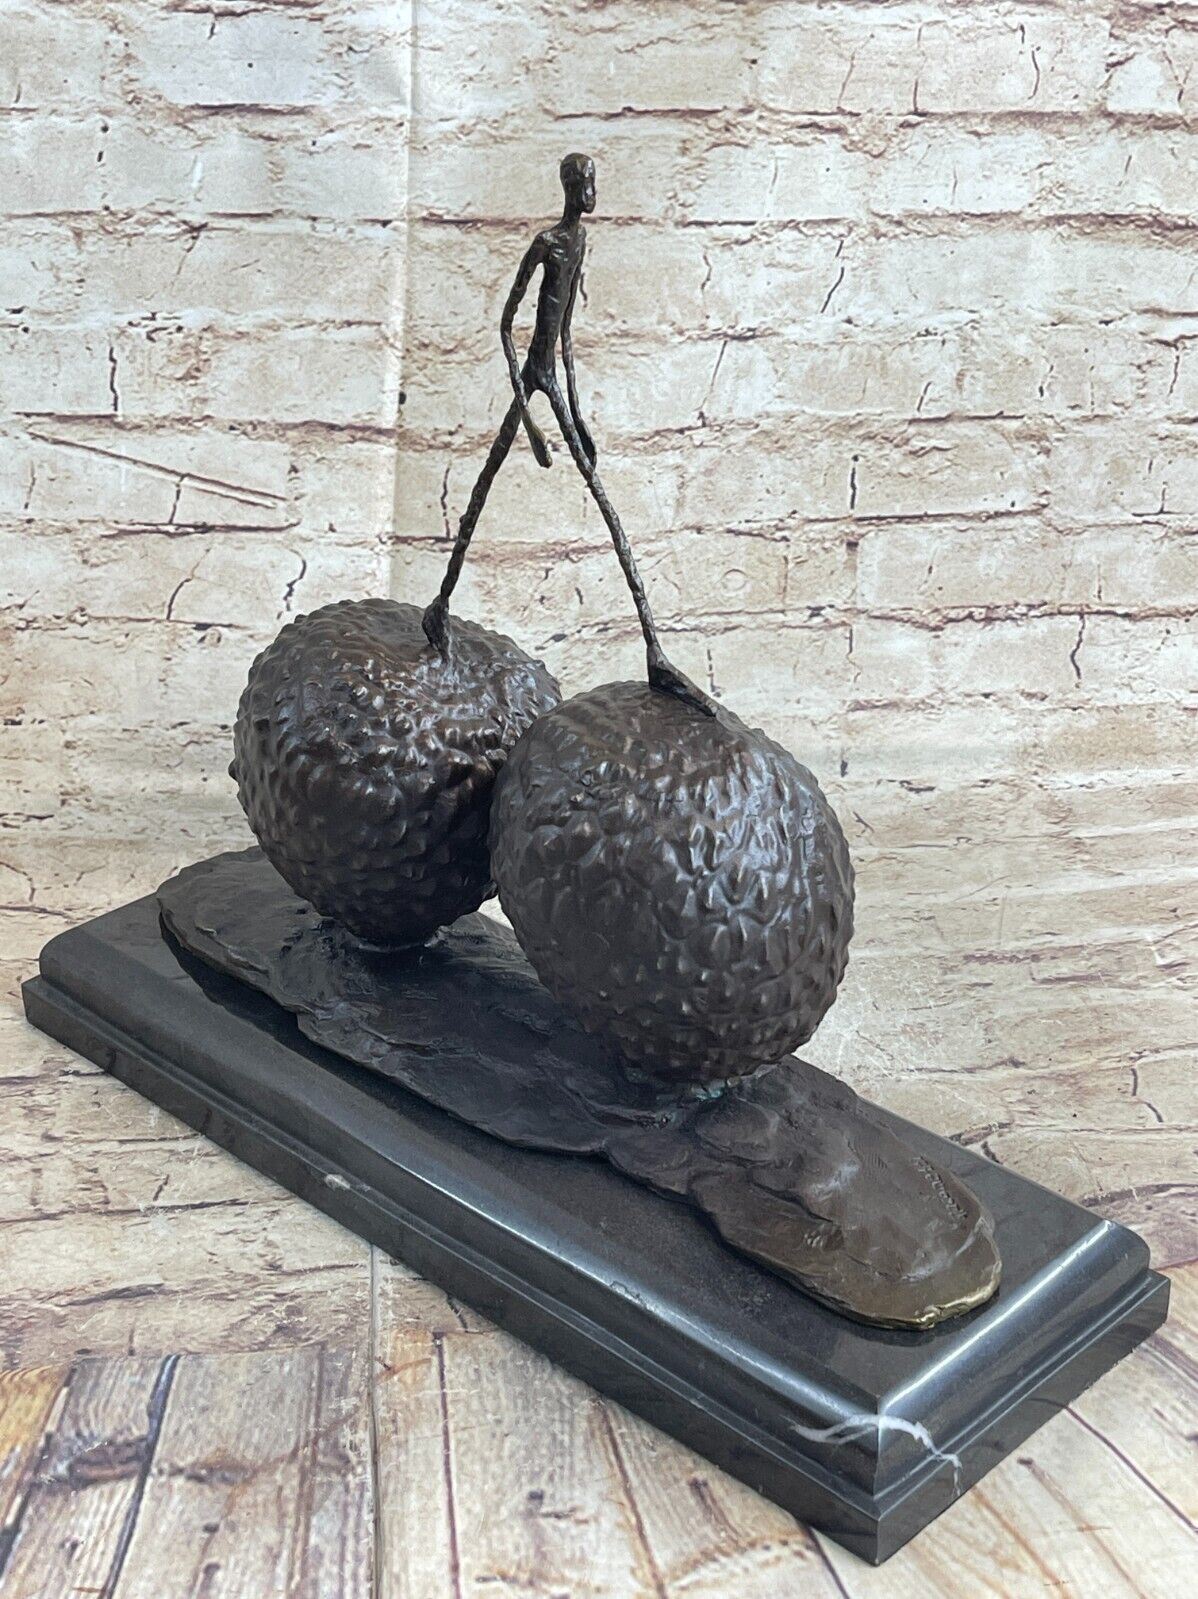 Handcrafted Large Museum Quality Strawberry and a Male Bronze Sculpture Figure